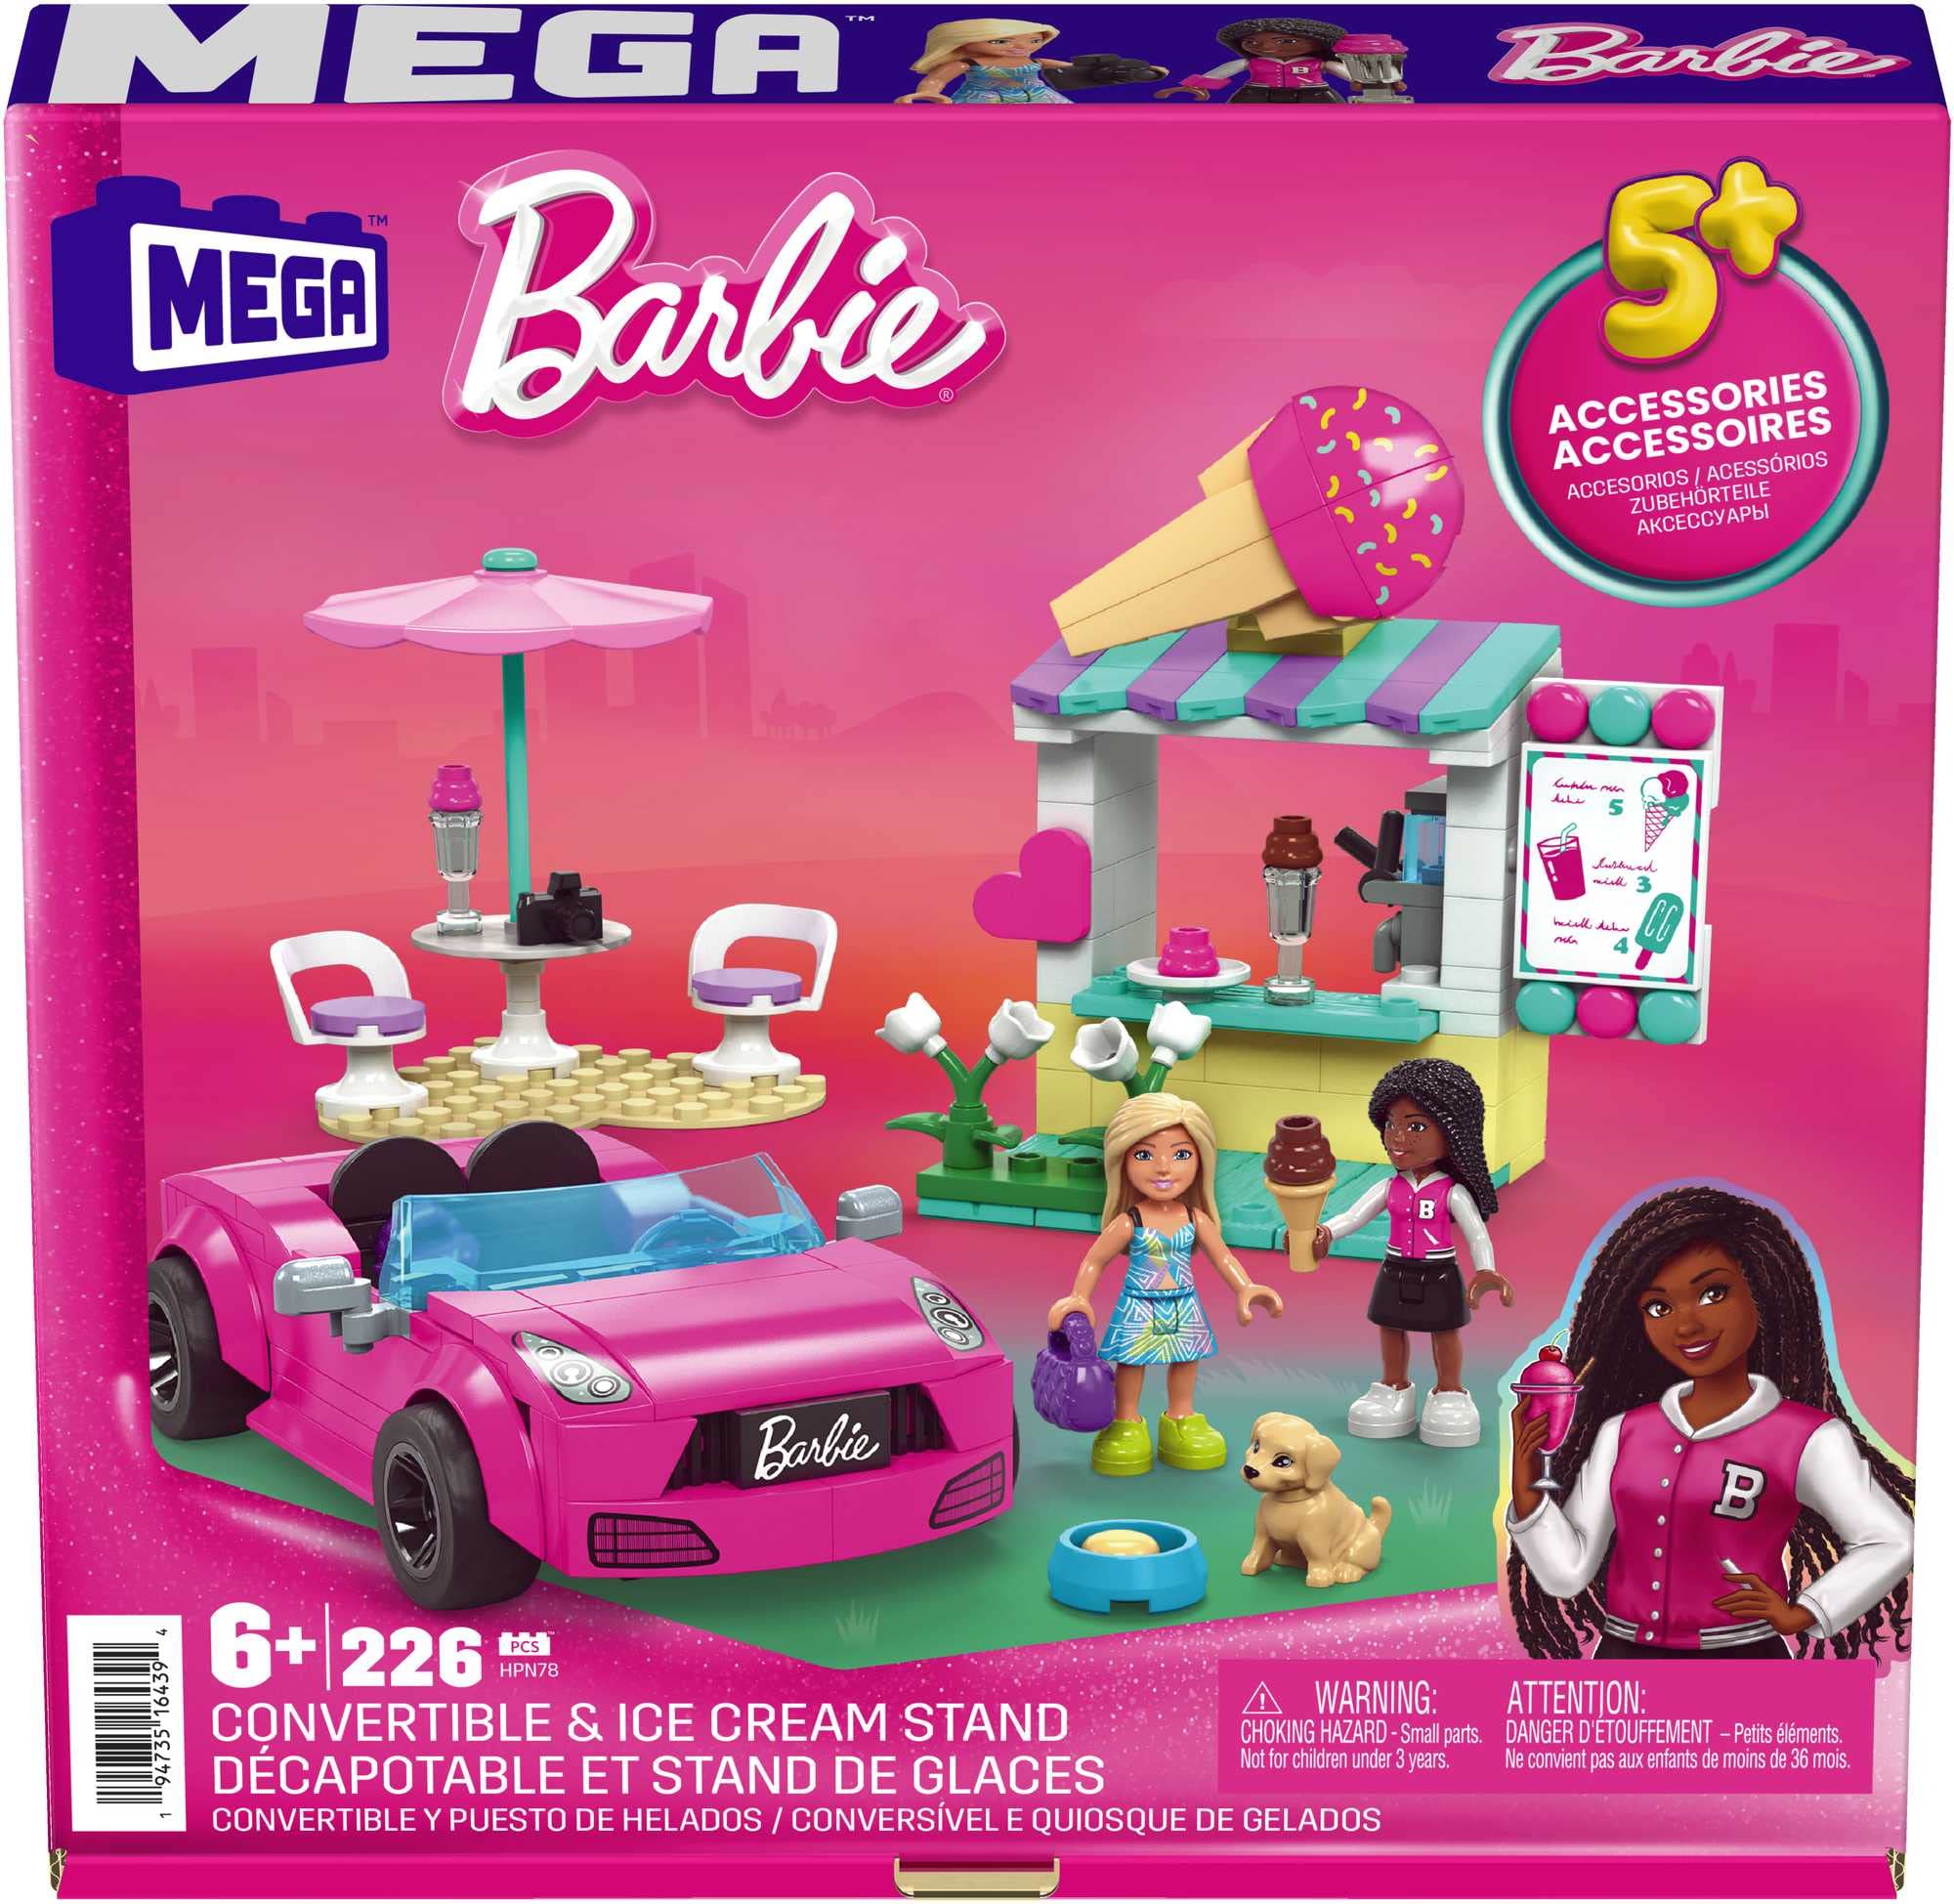 Barbie MEGA Barbie Car Building Toys Playset, Convertible & Ice Cream Stand With 225 Pieces, 2 Micro-Dolls and Accessories, Pink, Gift Ideas For Kids